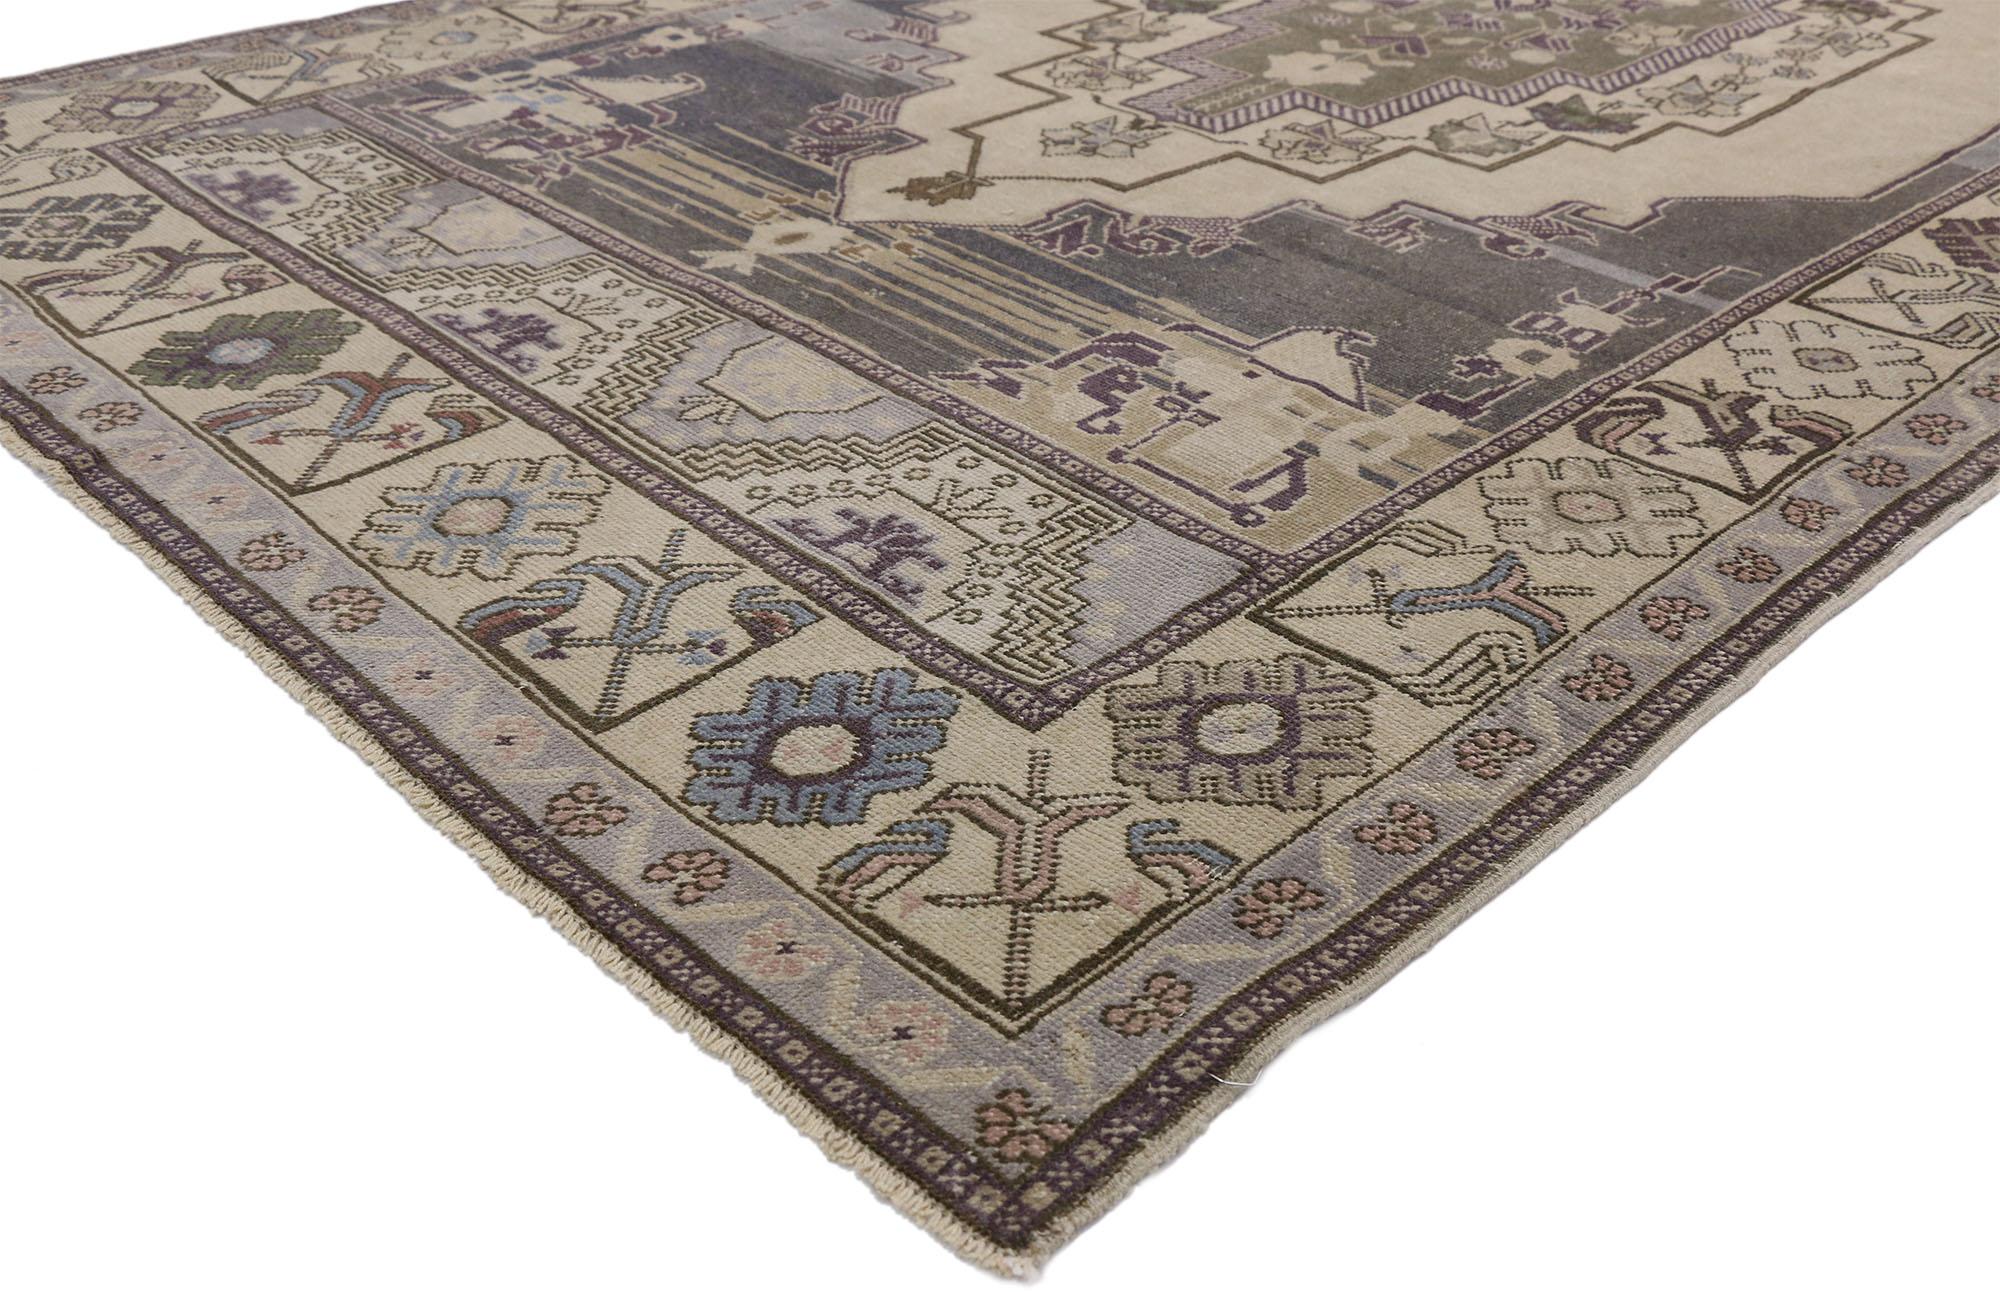 52475, vintage Turkish Oushak rug with Cottage Shaker style. Featuring a large center medallion on an abrashed pastel backdrop, this hand knotted wool vintage Turkish Oushak rug with Shaker style displays a plethora of angular floral motifs.